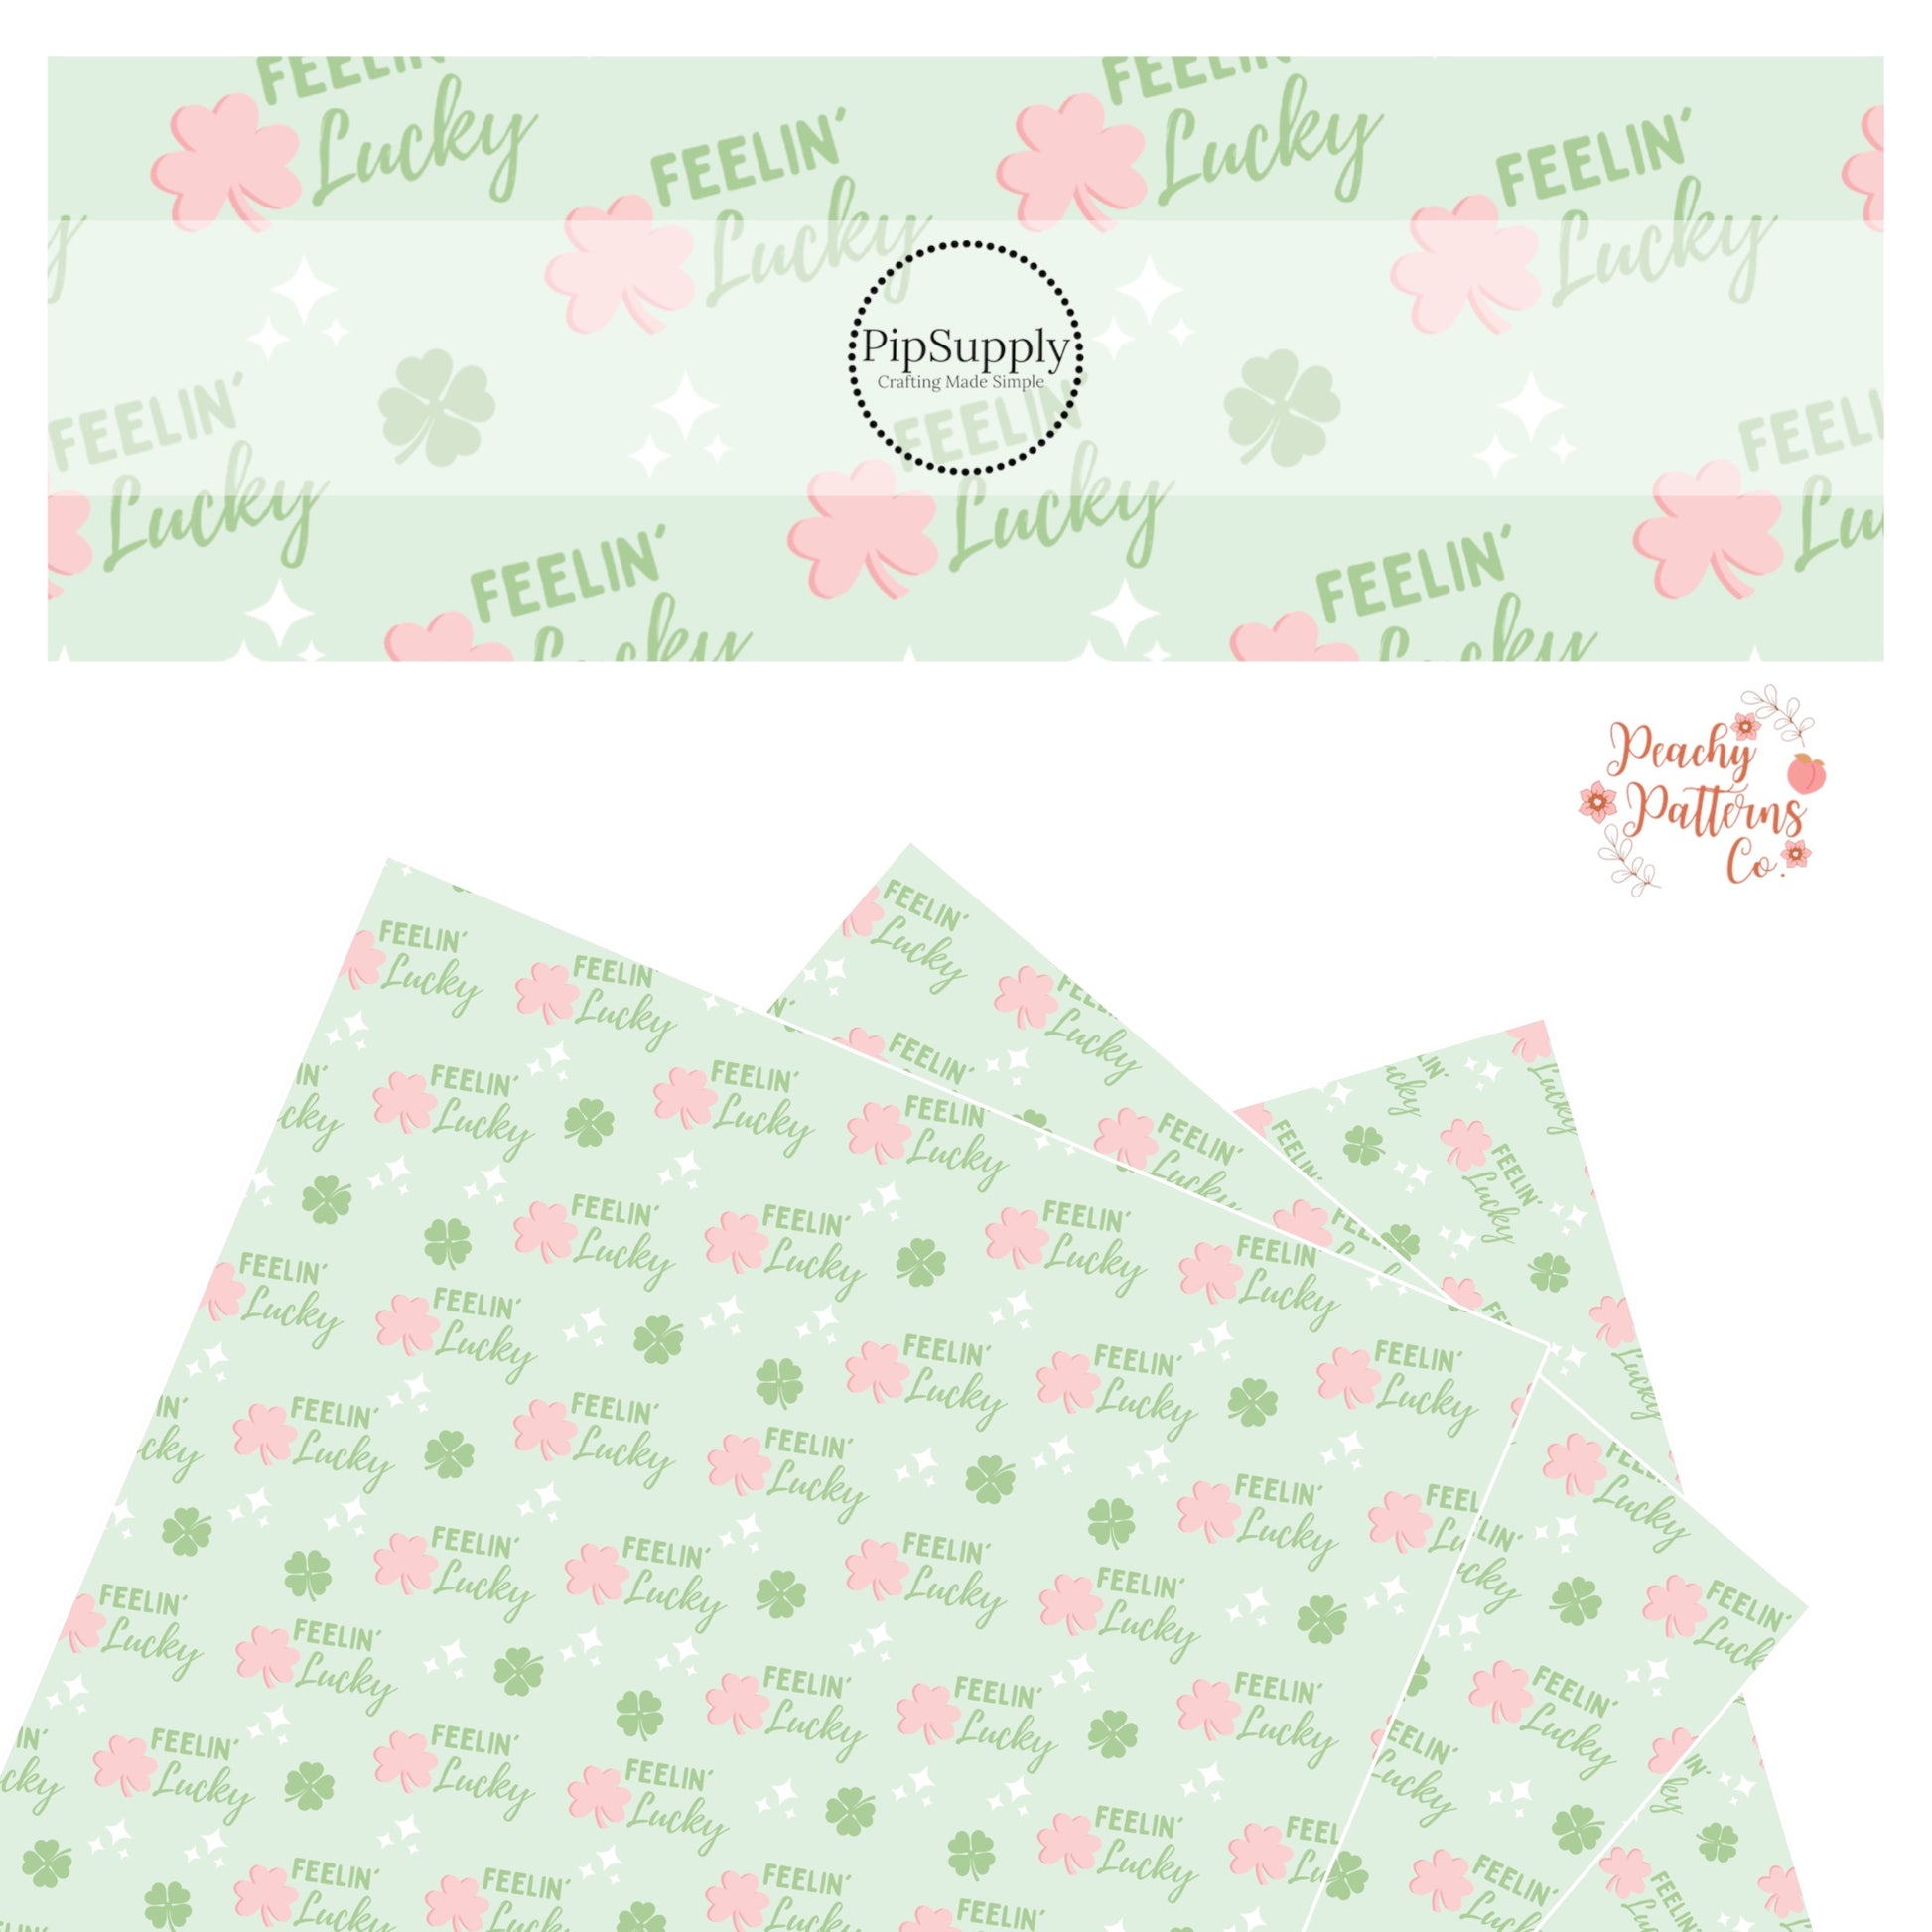 Pink 3 leaf clovers and green 4 leaf heart clovers with white sparkles and the words "feelin' lucky" on a pastel green faux leather sheet